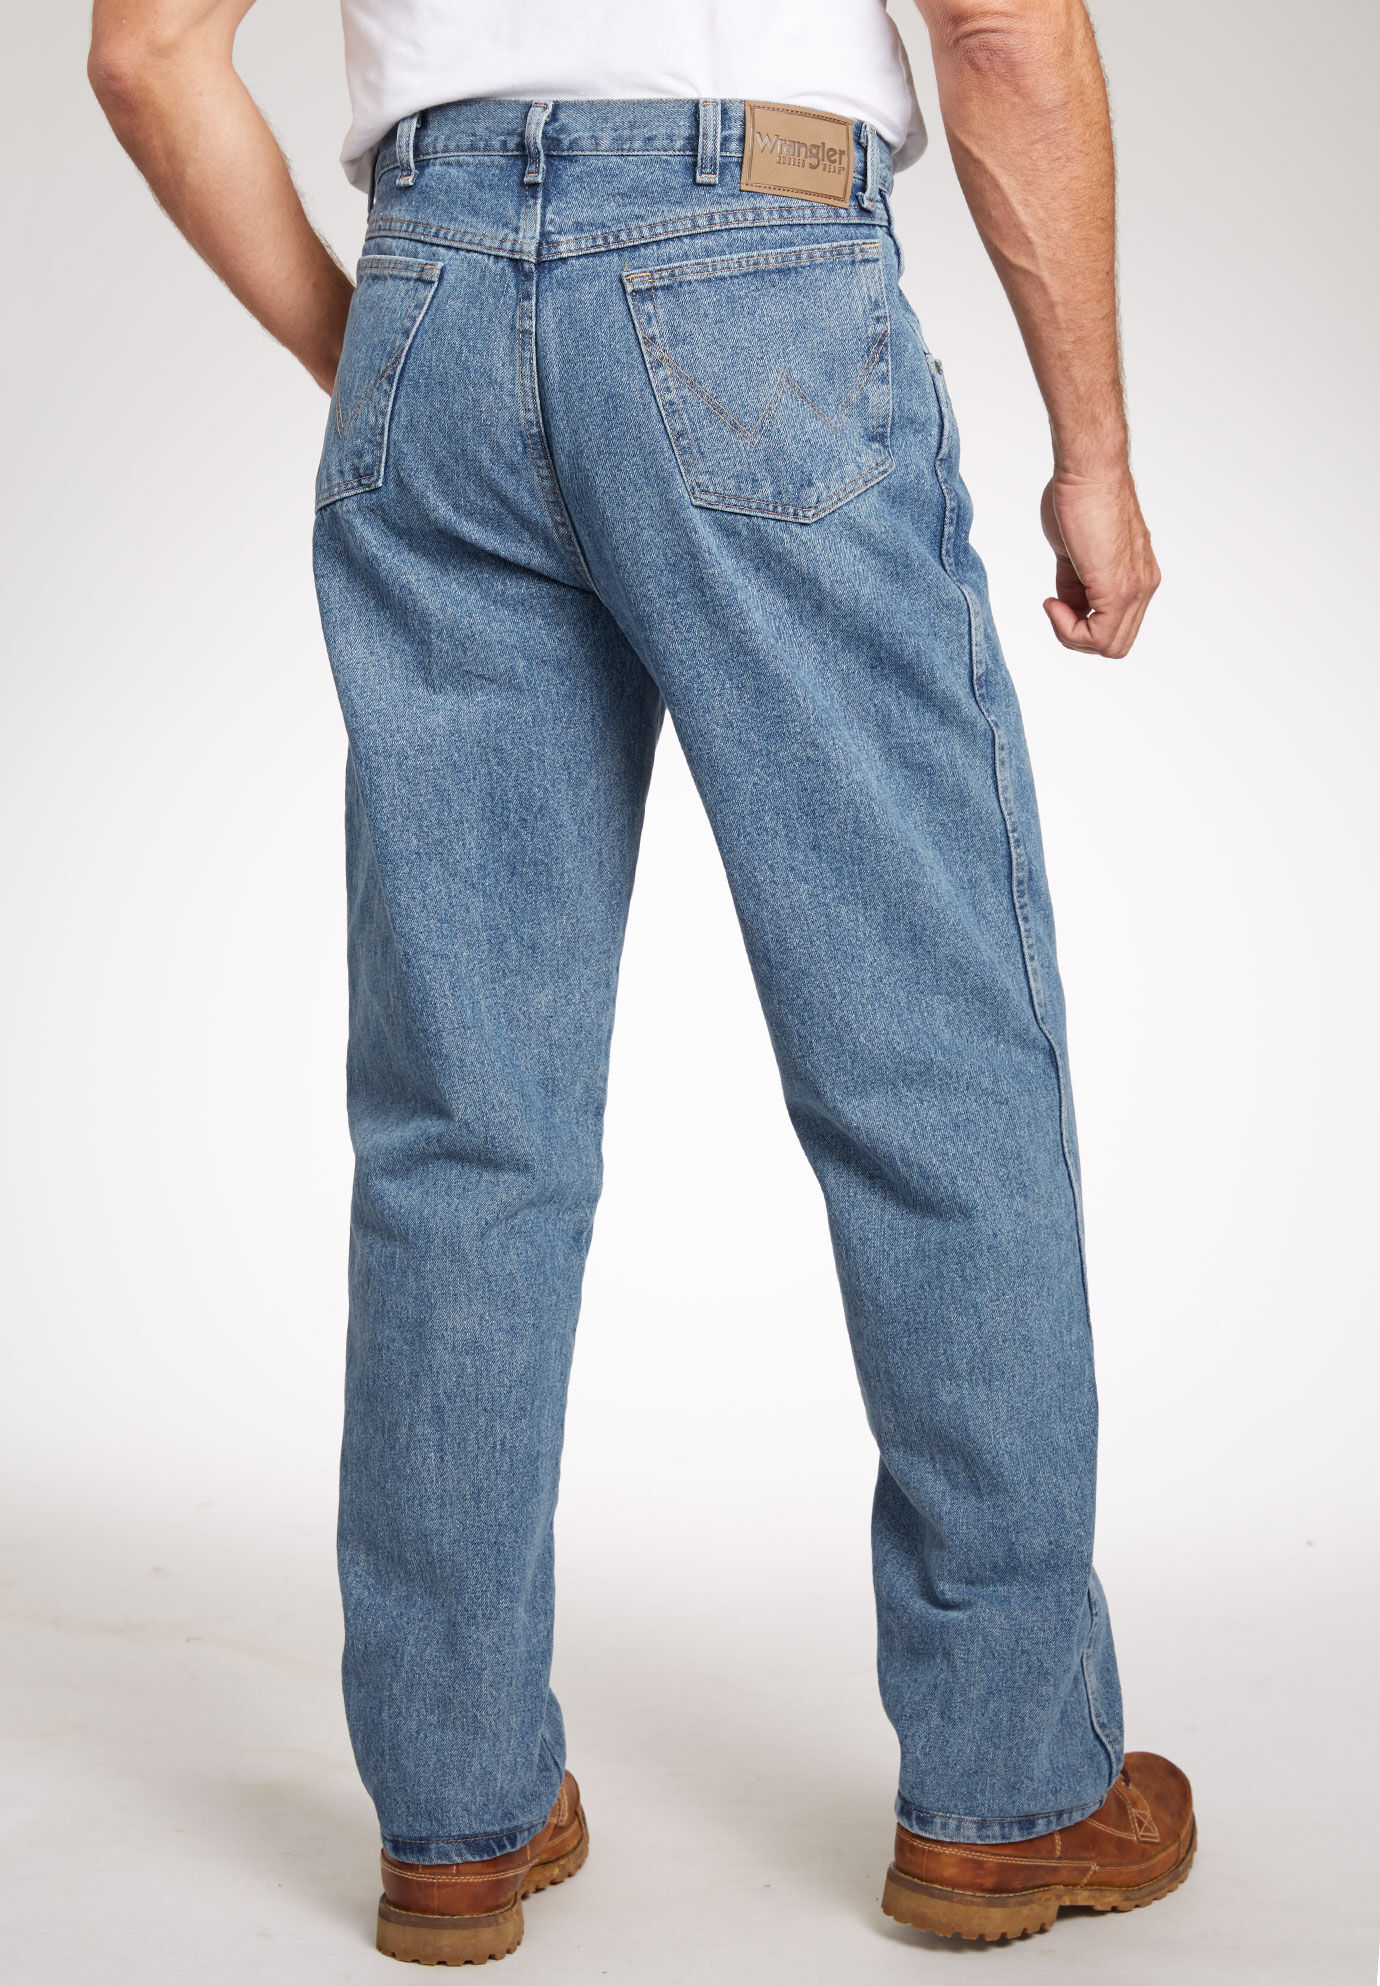 wrangler classic fit jeans